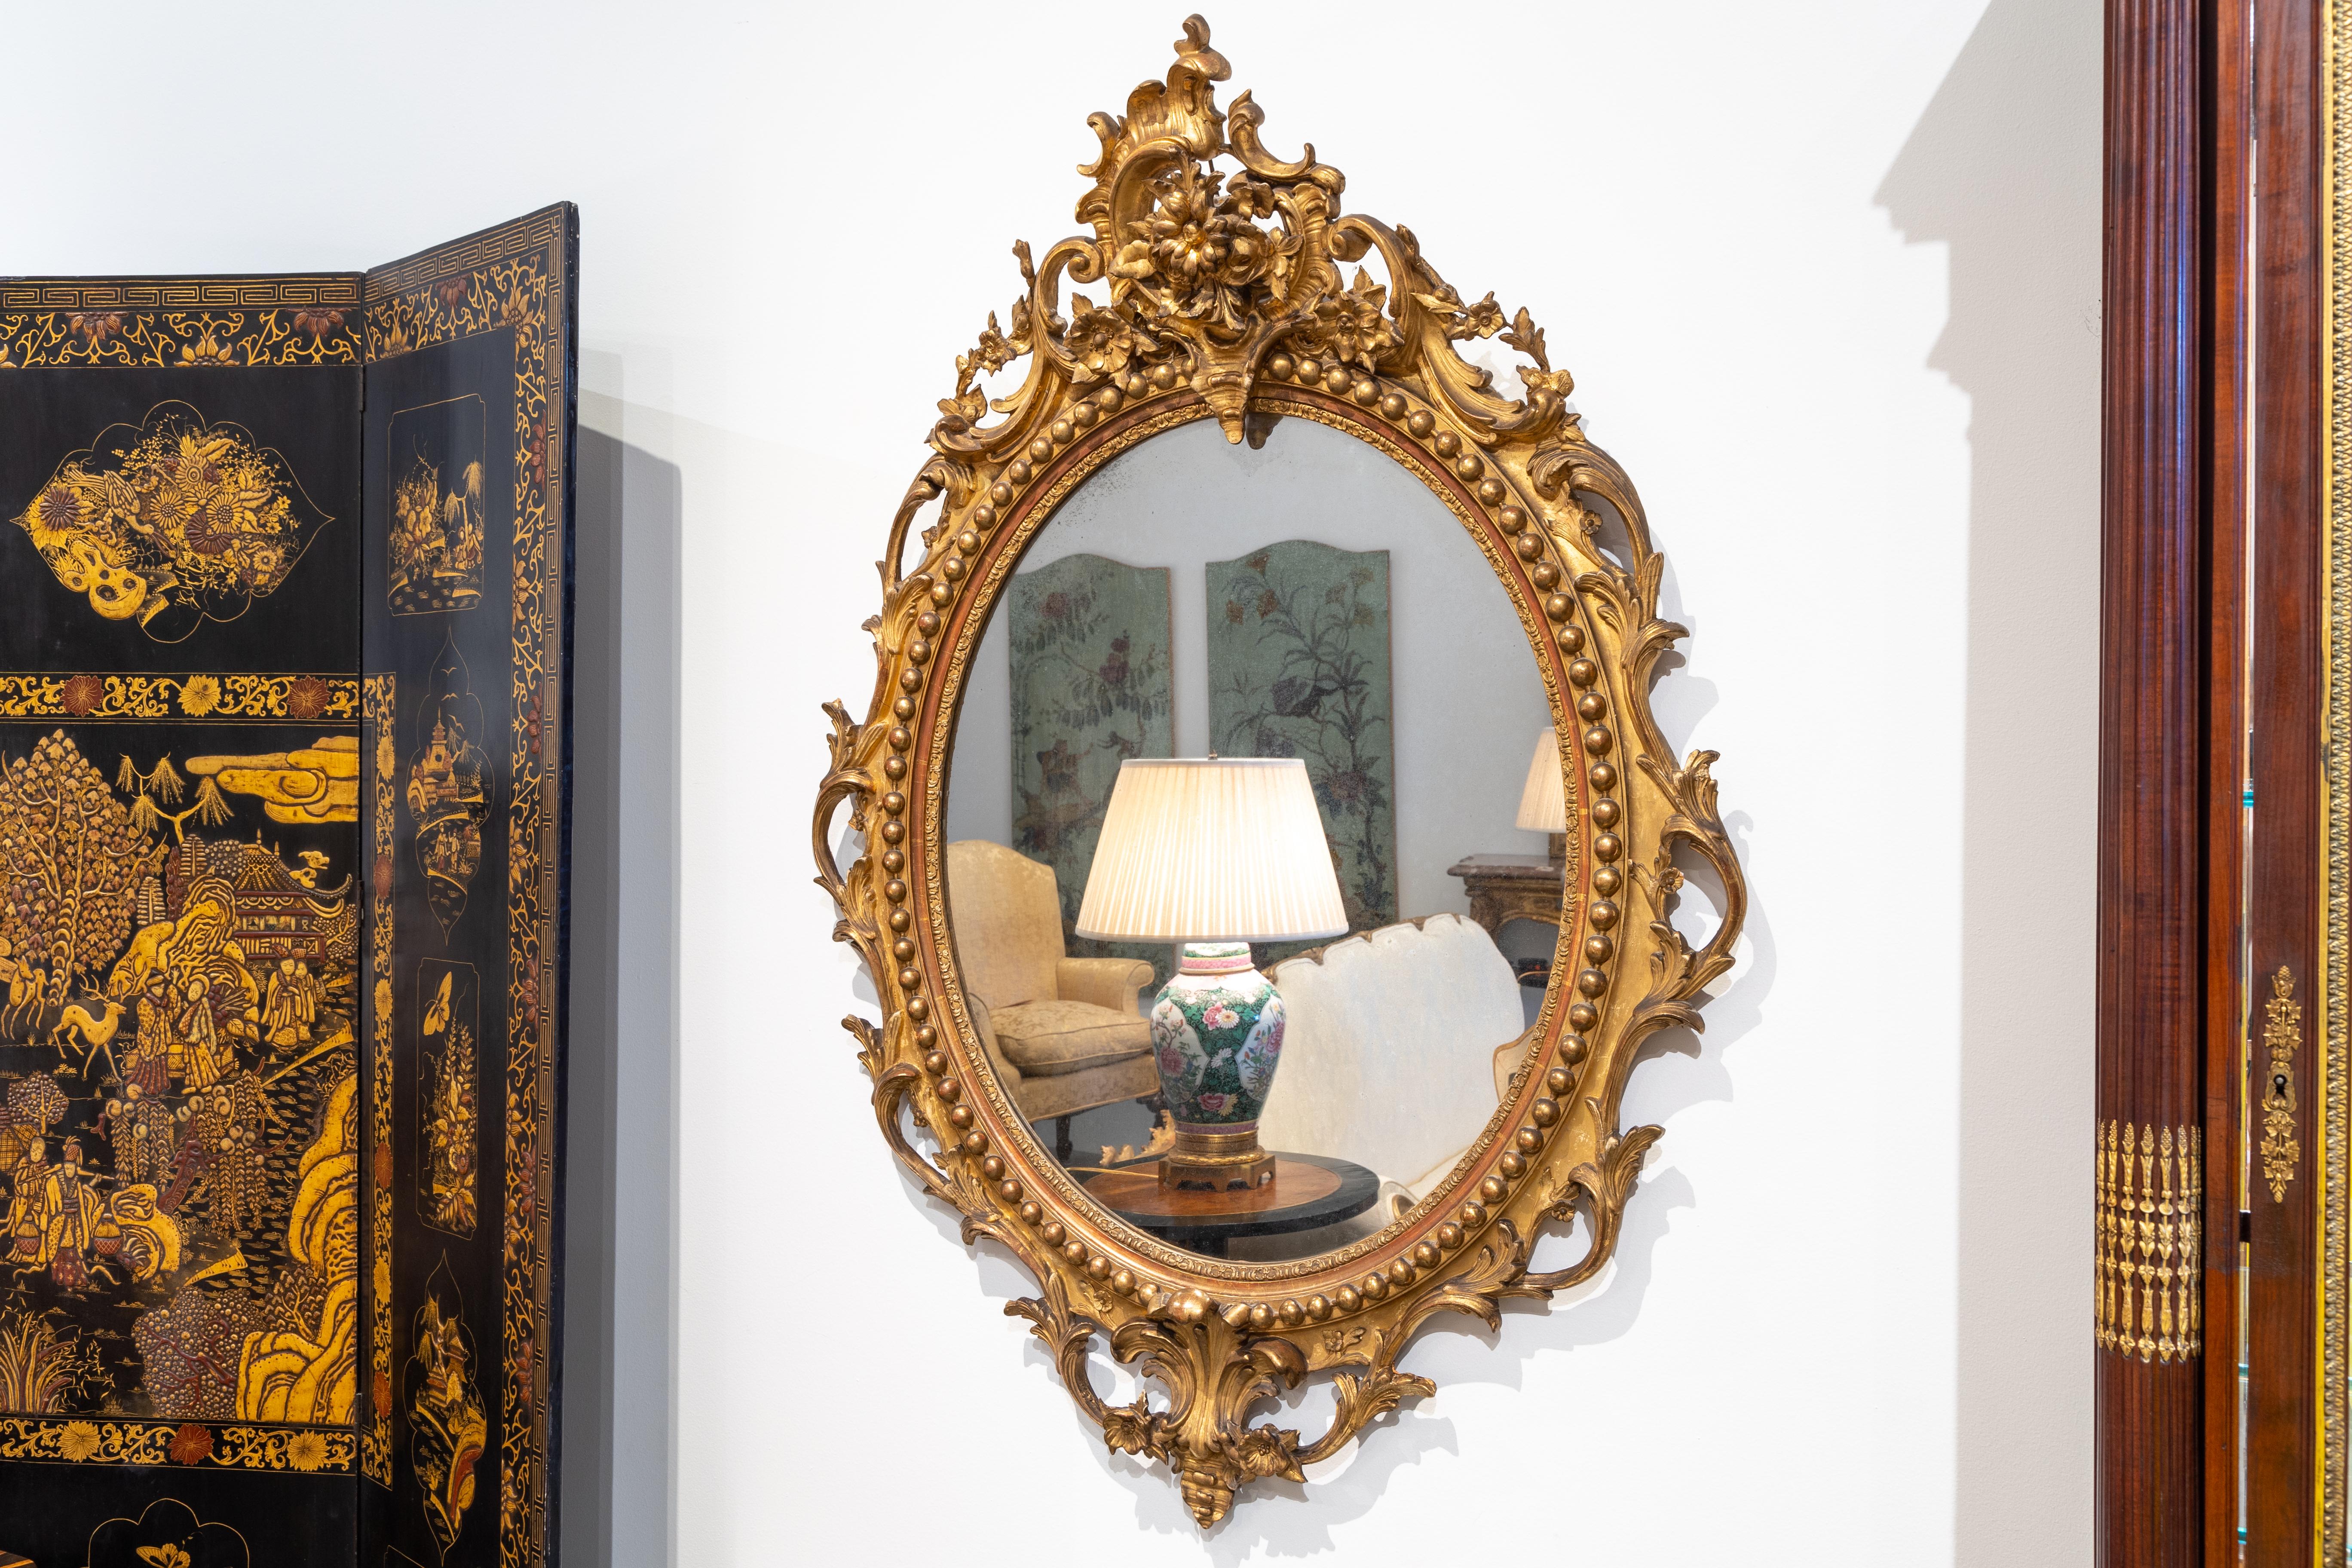 A fine French 19th century hand carved and gilt oval Louis XVI mirror. Beautiful carving and detail. All original.